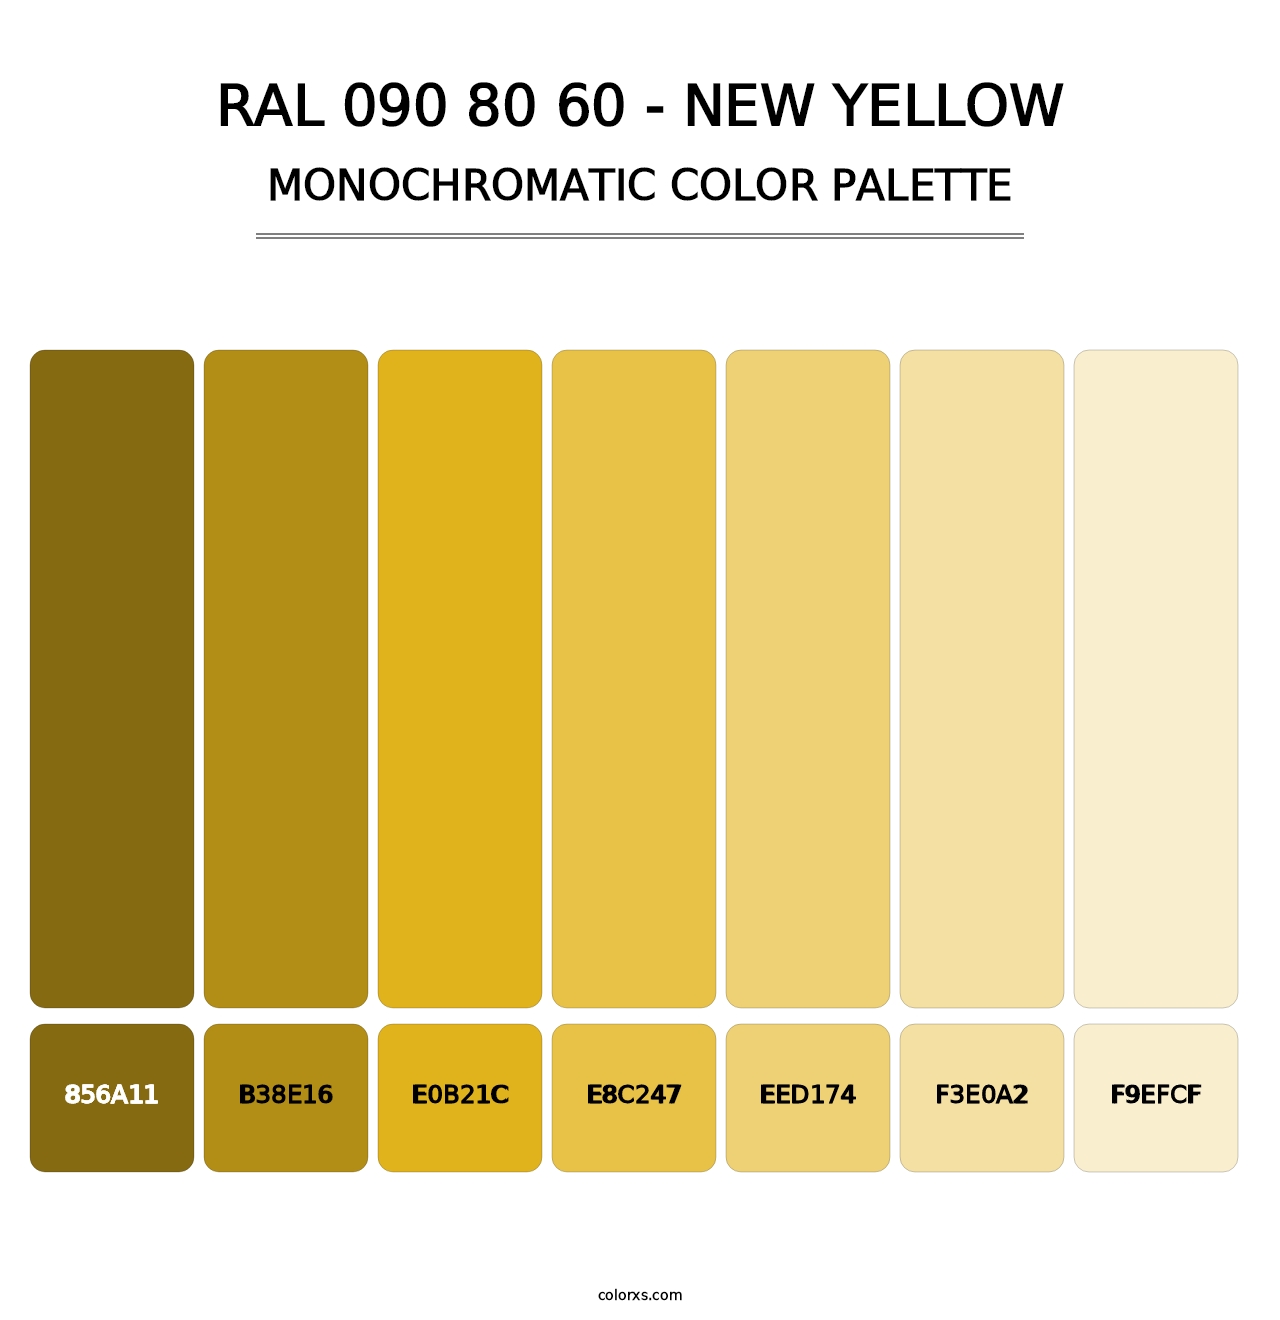 RAL 090 80 60 - New Yellow - Monochromatic Color Palette